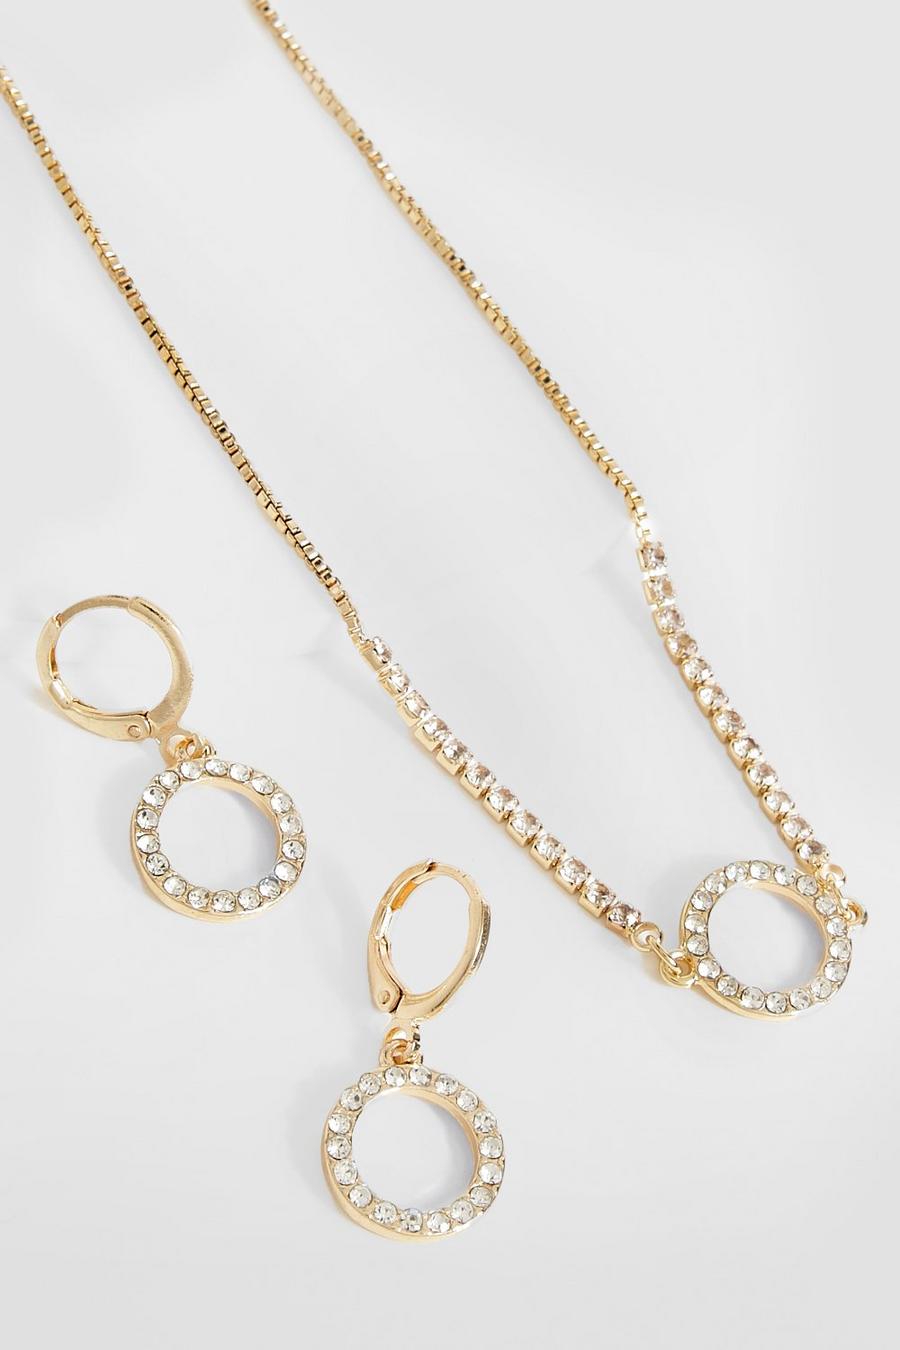 Gold Circle Rhinestone Necklace And Earring Set